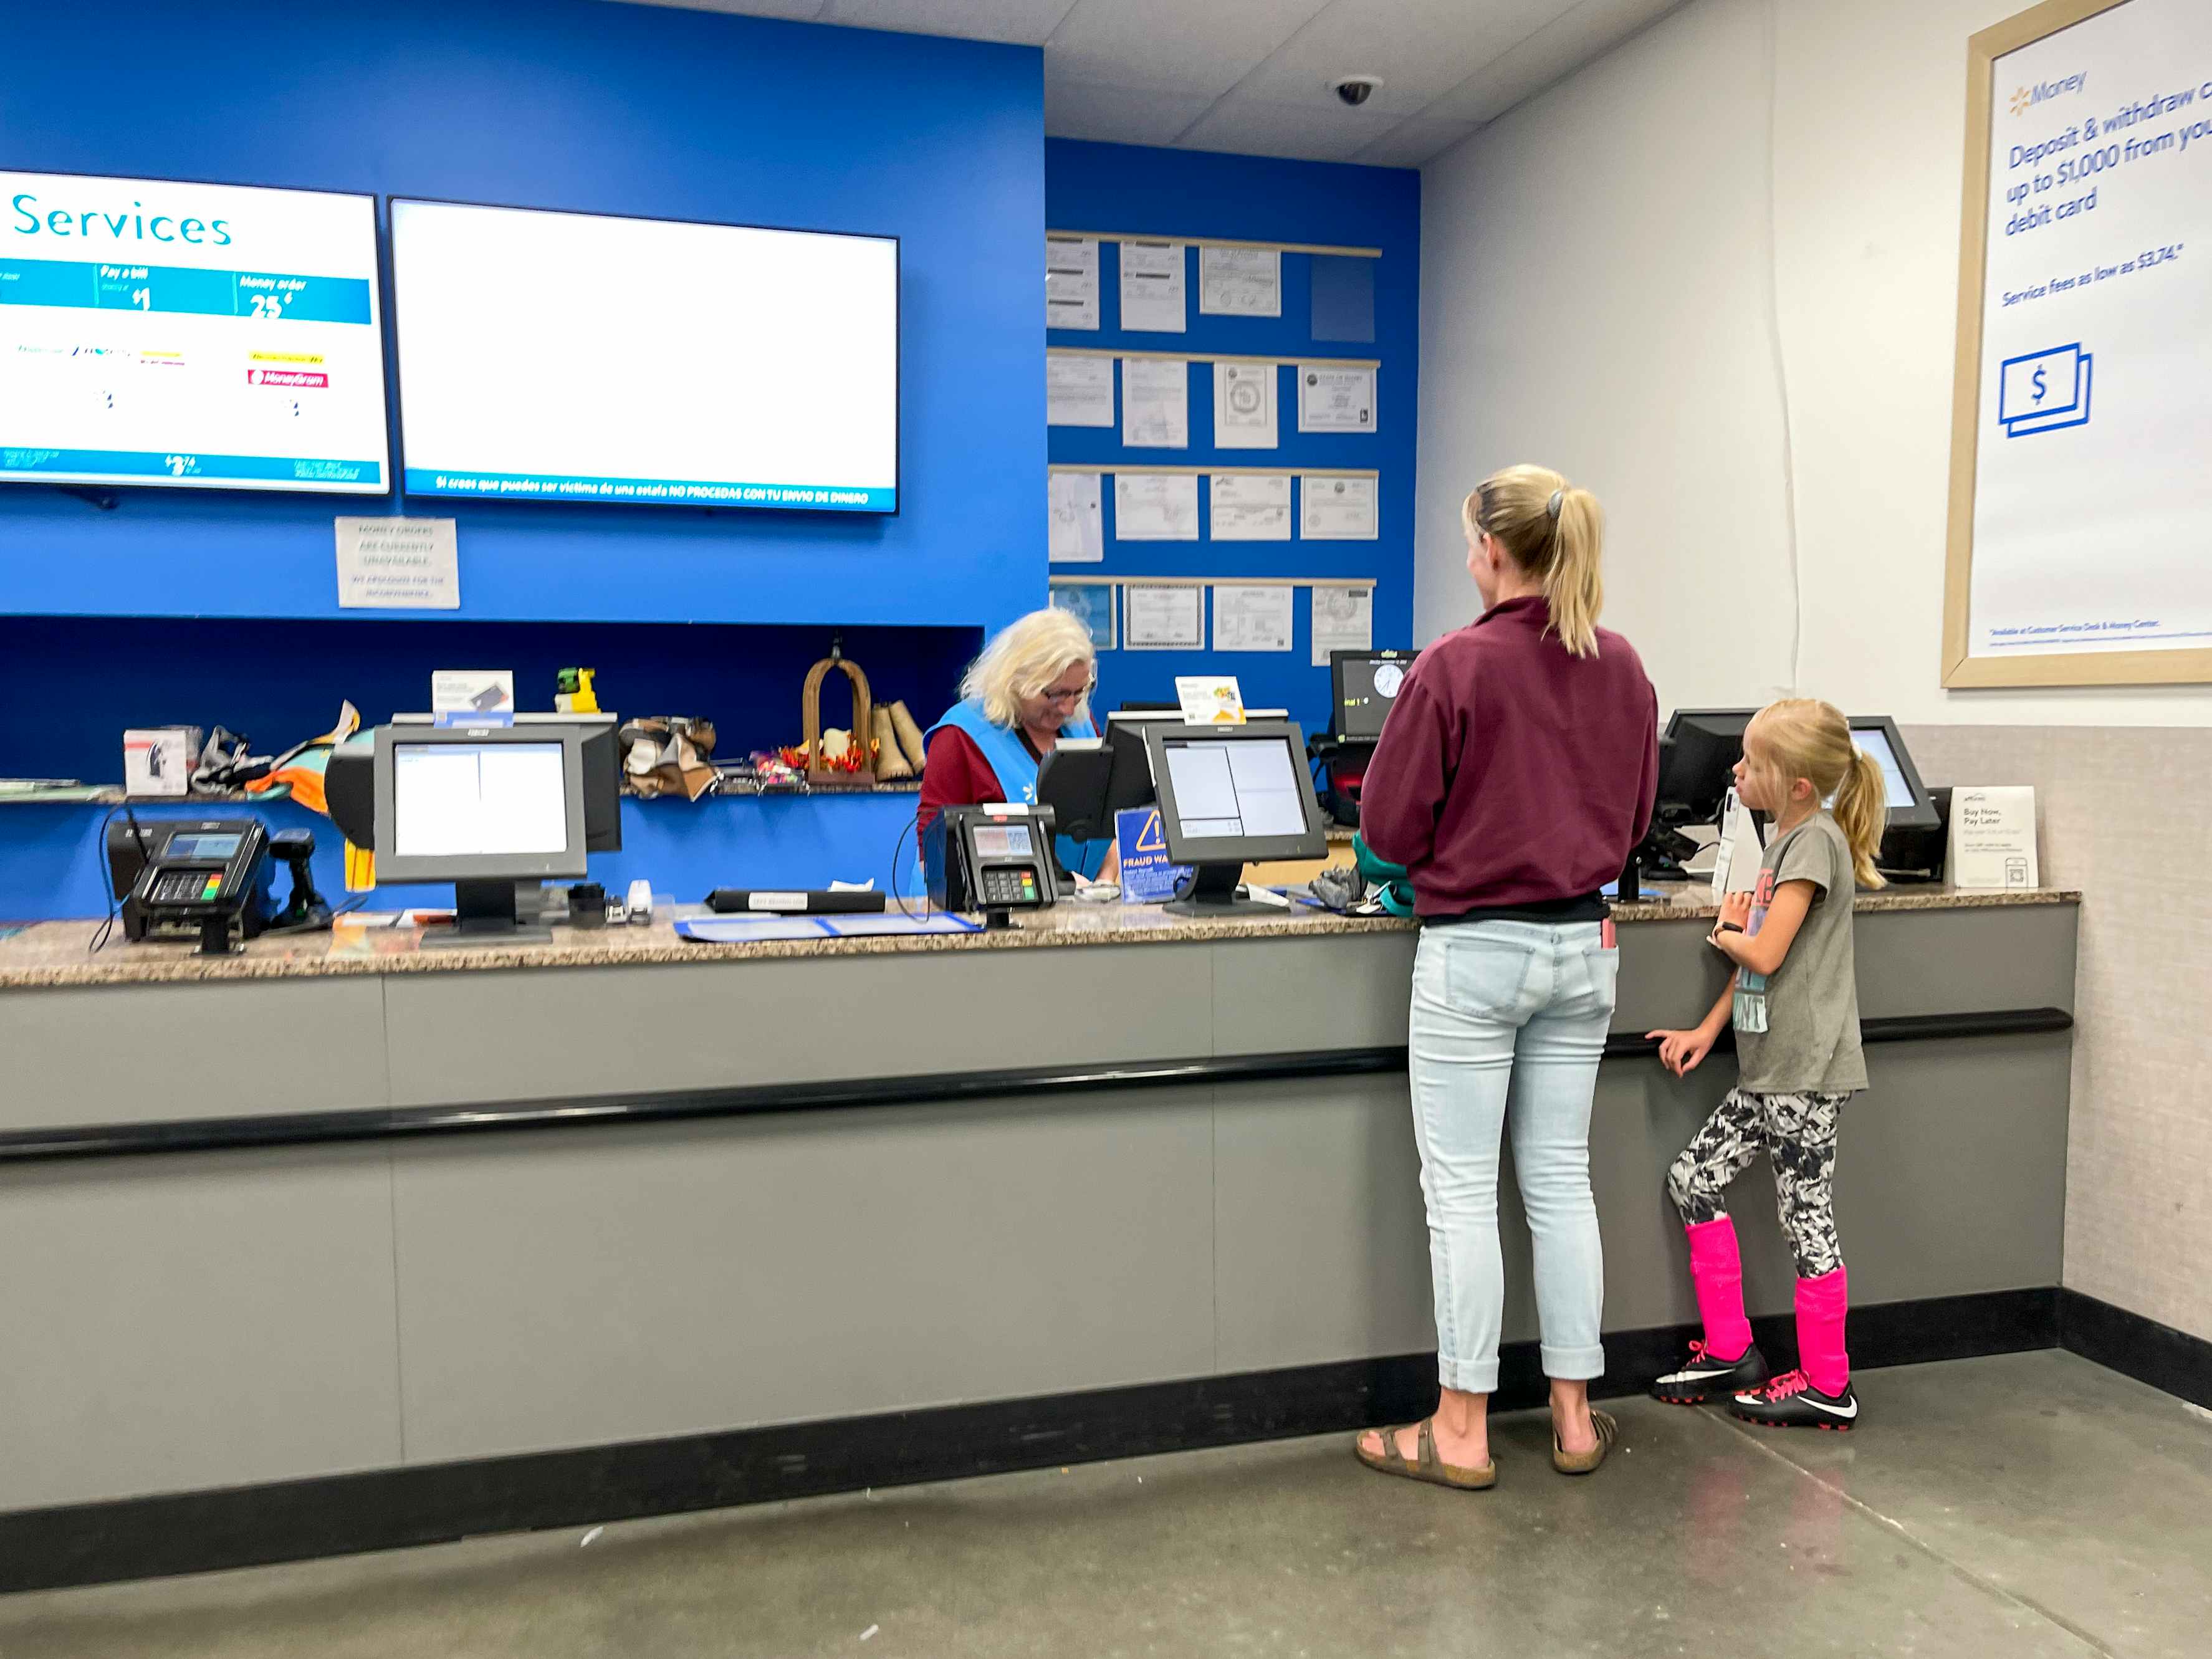 A parent and child standing together at the Walmart customer service desk